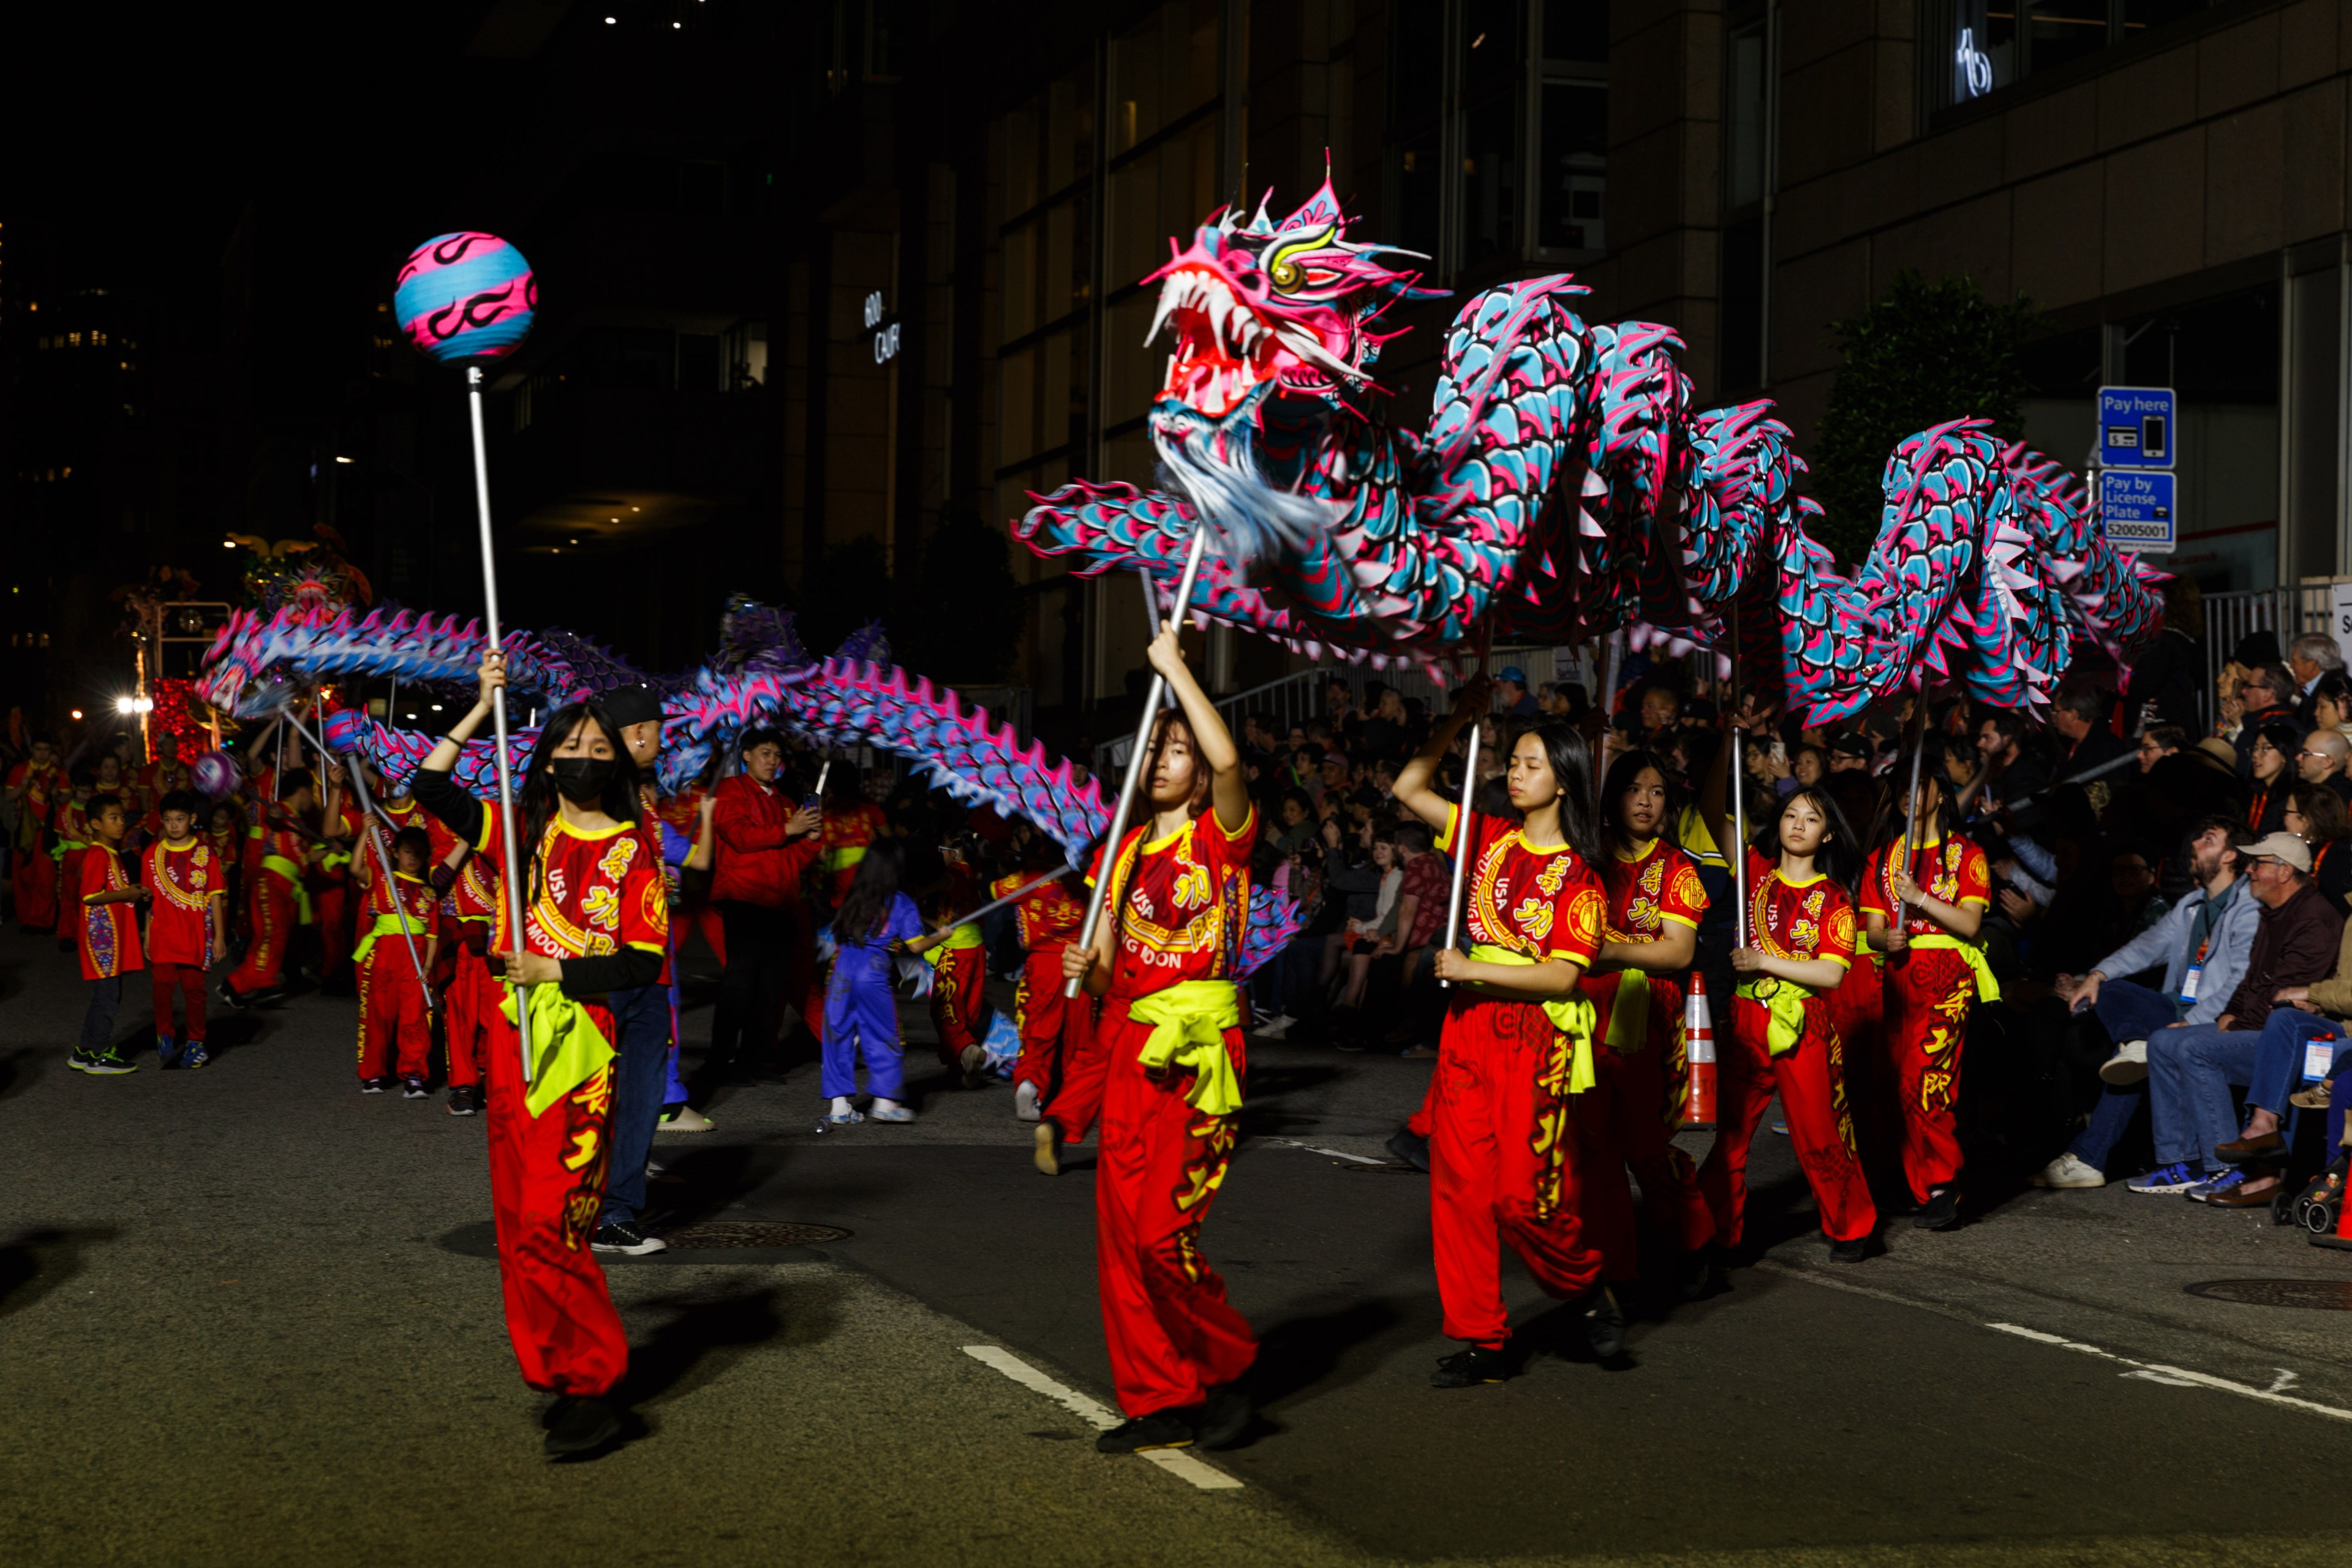 A vibrant dragon dance at night with performers in red and spectators watching.